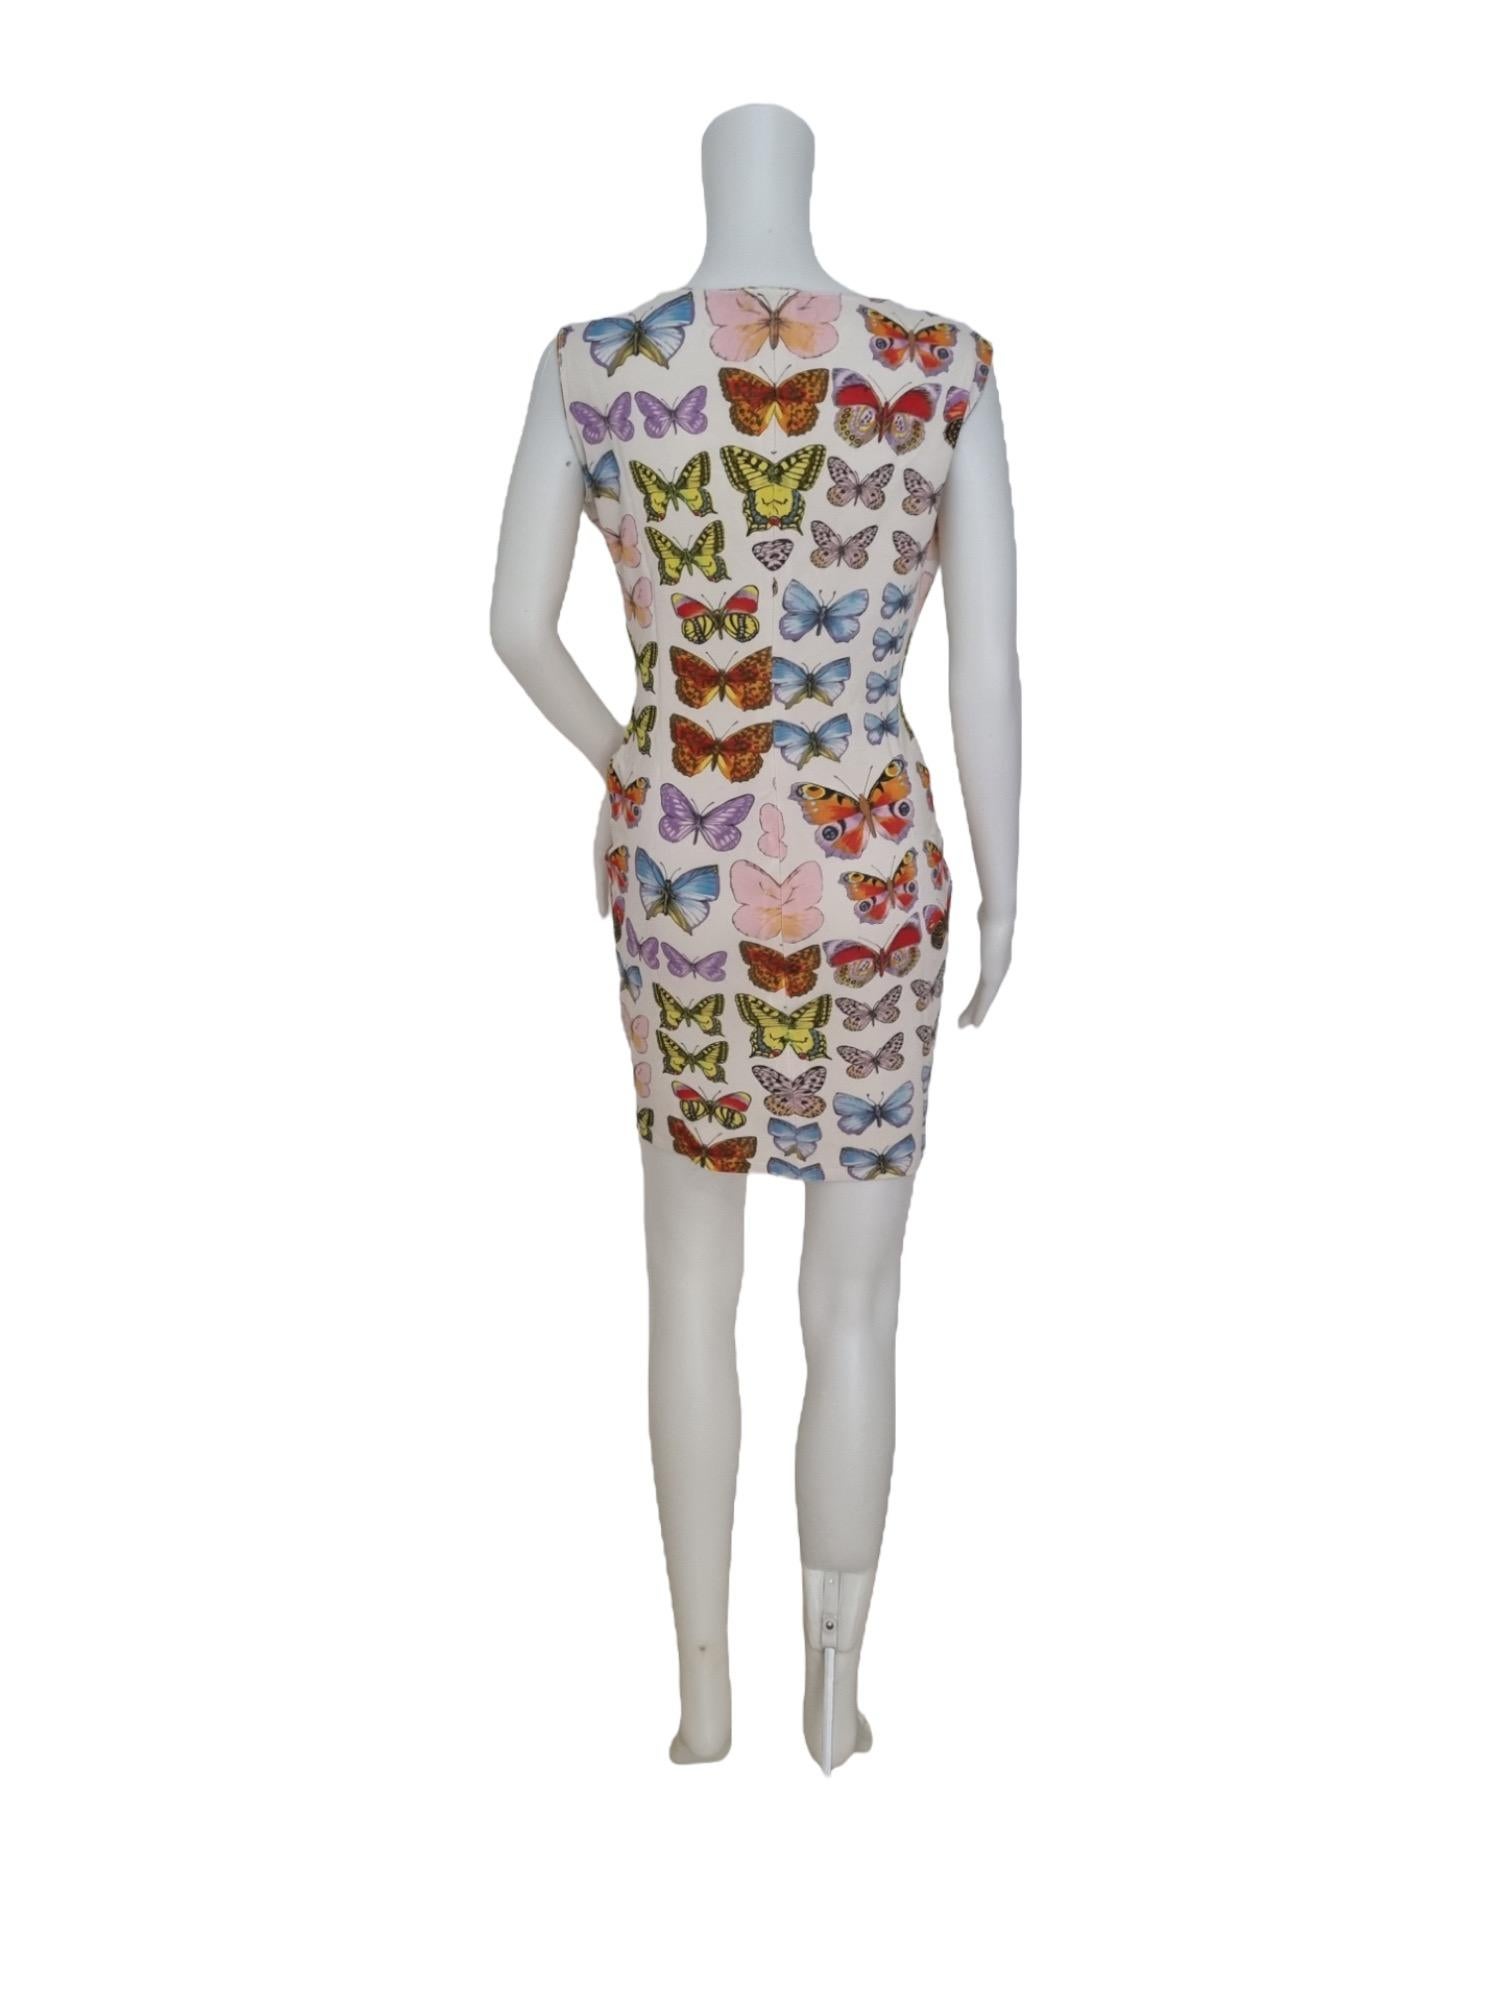 Versace SS 1995 butterfly runway dress In Excellent Condition For Sale In London, GB